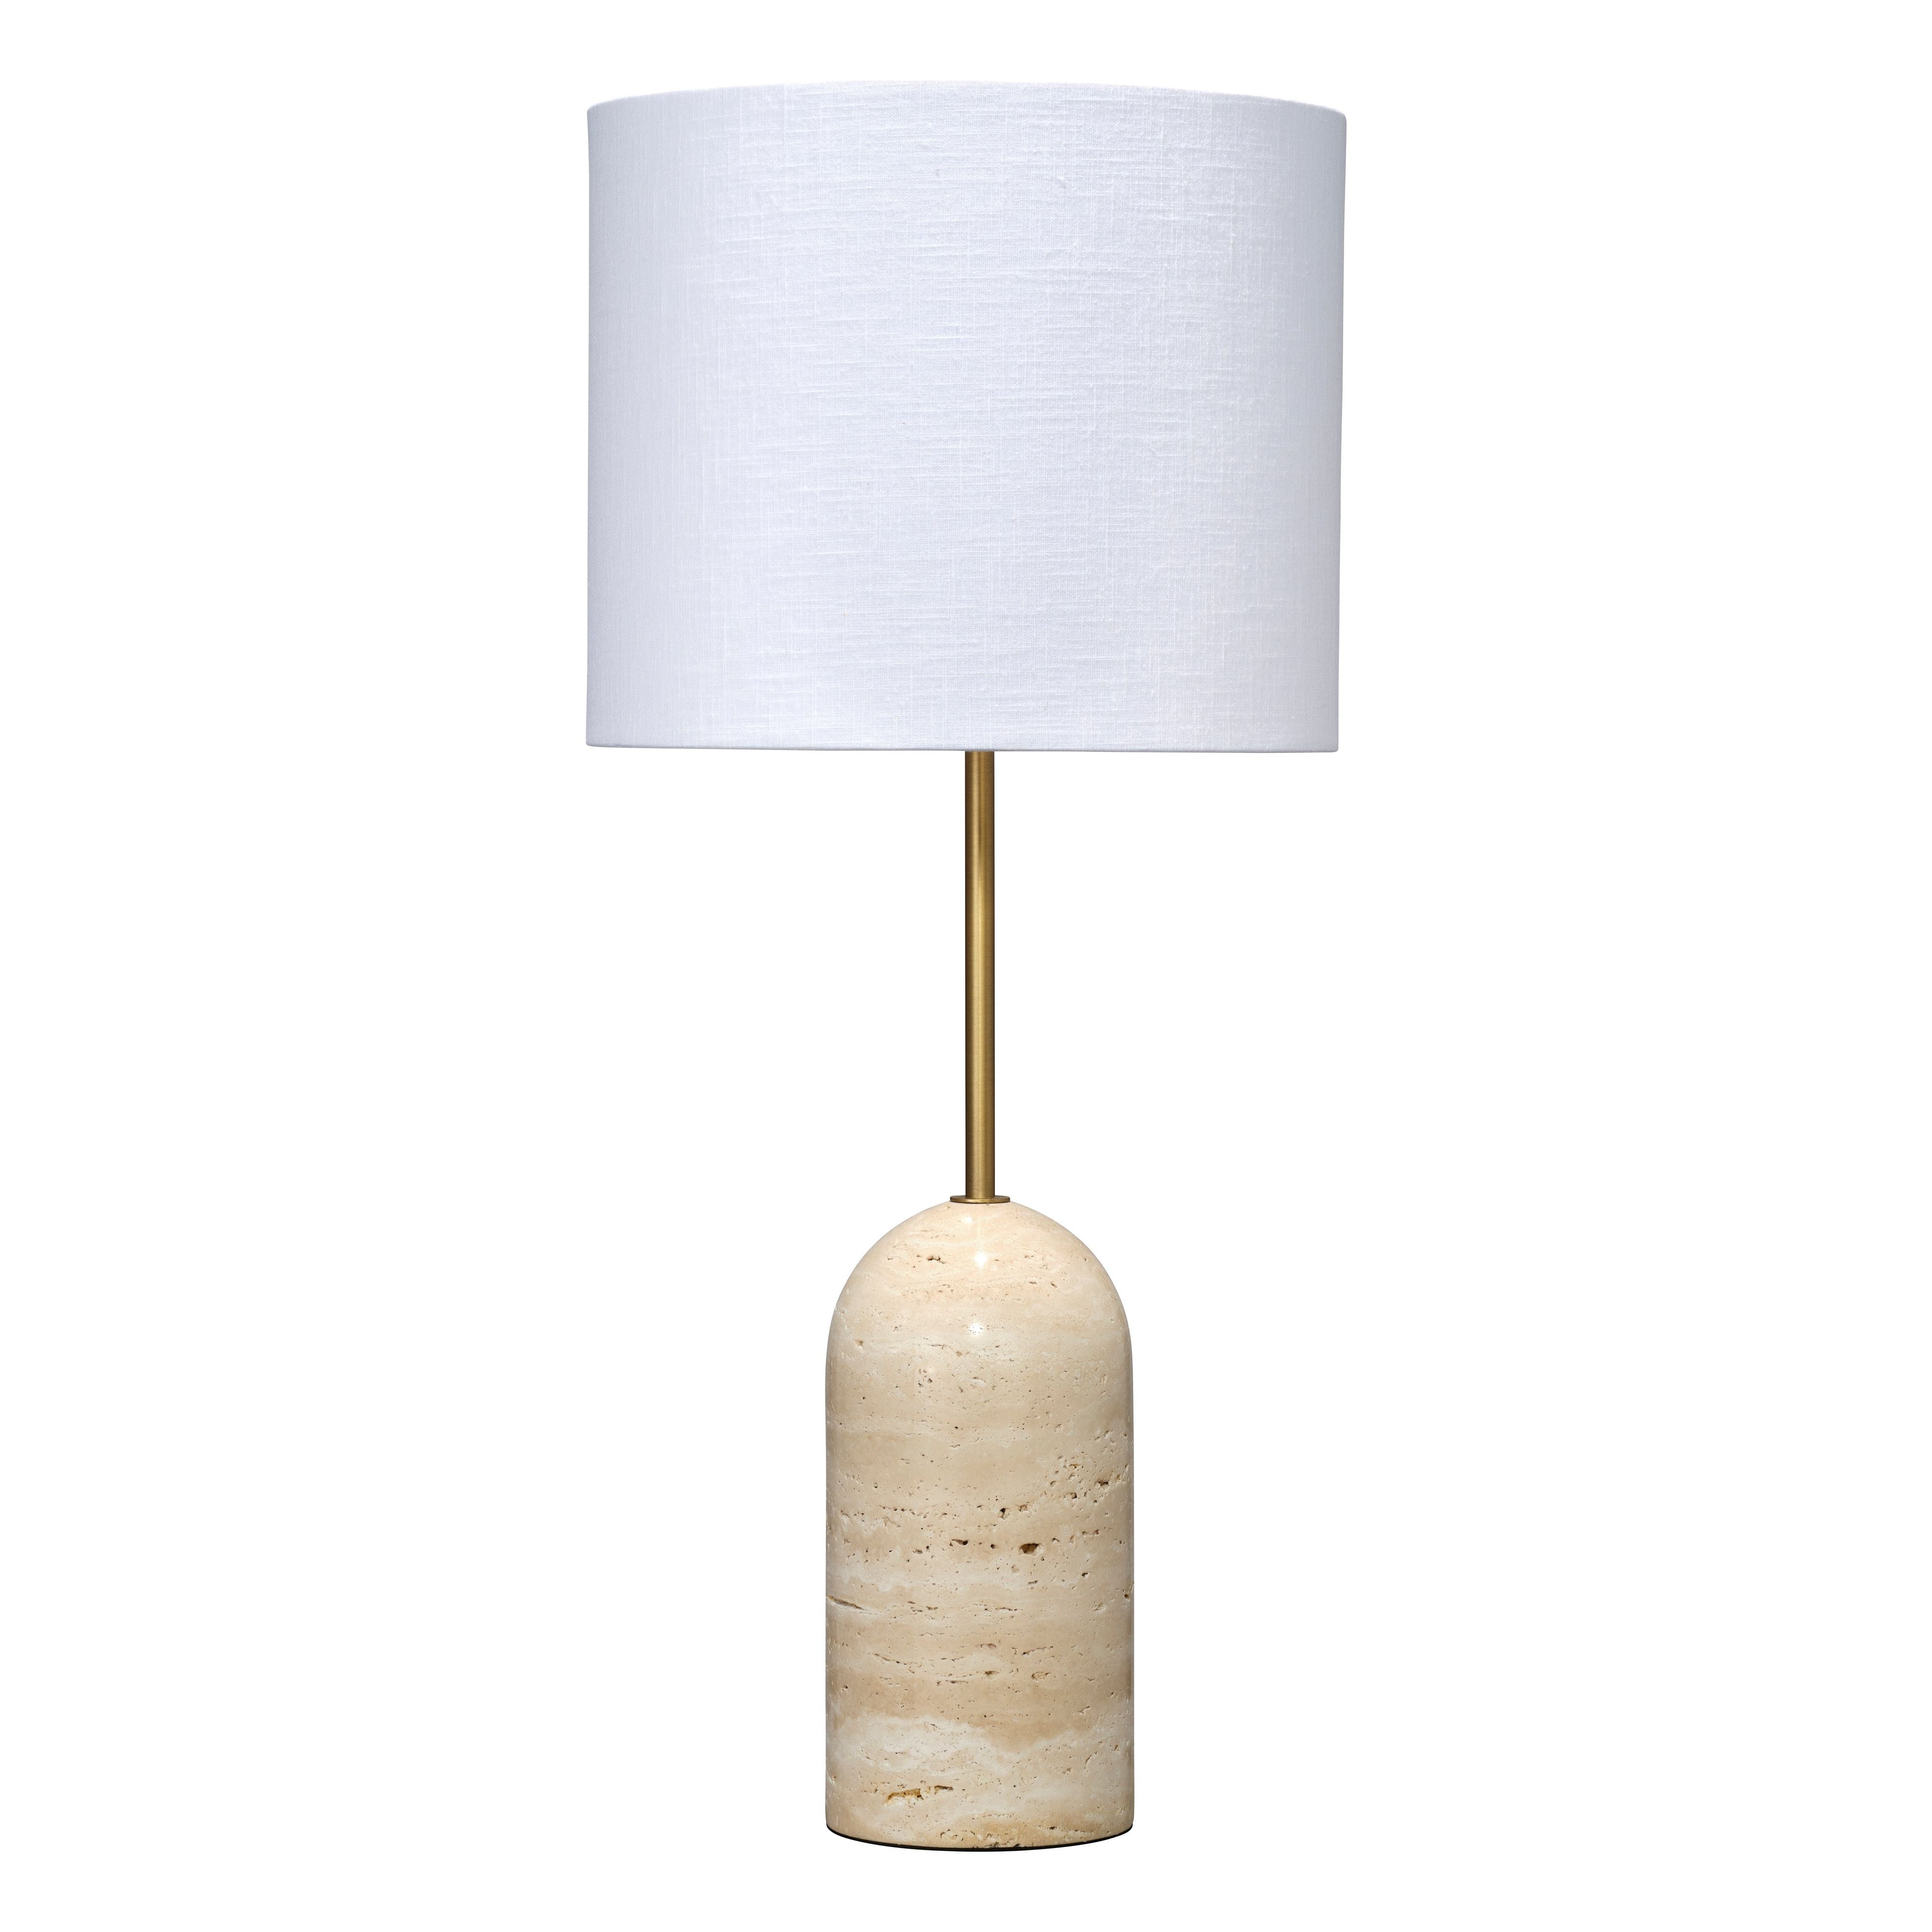 Jamie Young Company - 9HOLTTLNATRA - Holt Table Lamp in Travertine - Holt - Brown 